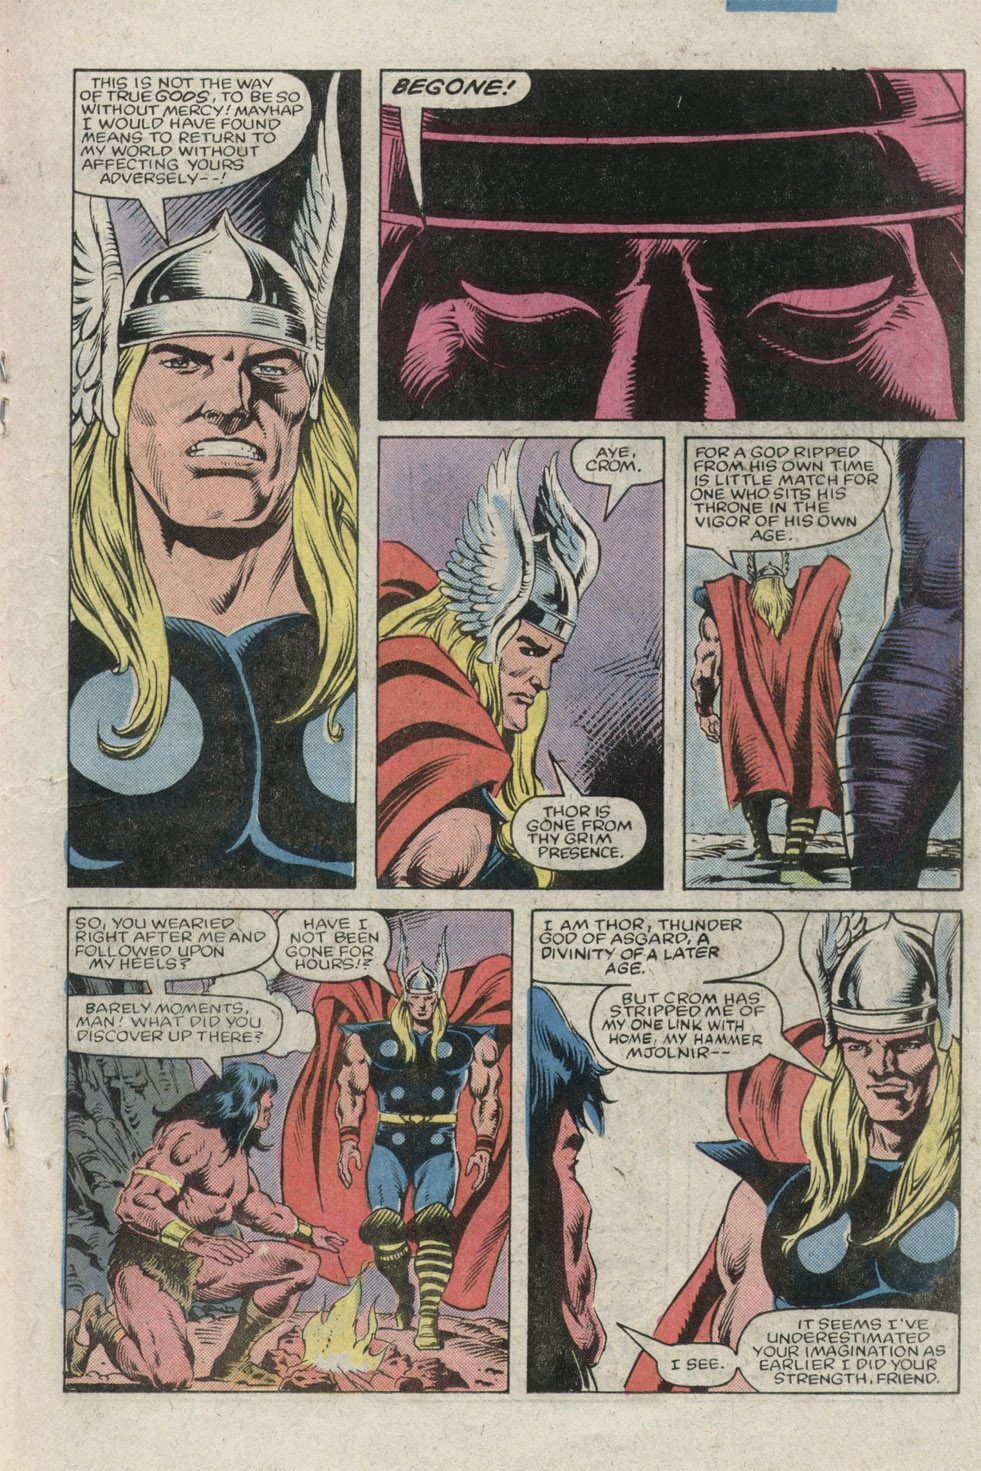 What If? (1977) issue 39 - Thor battled conan - Page 27